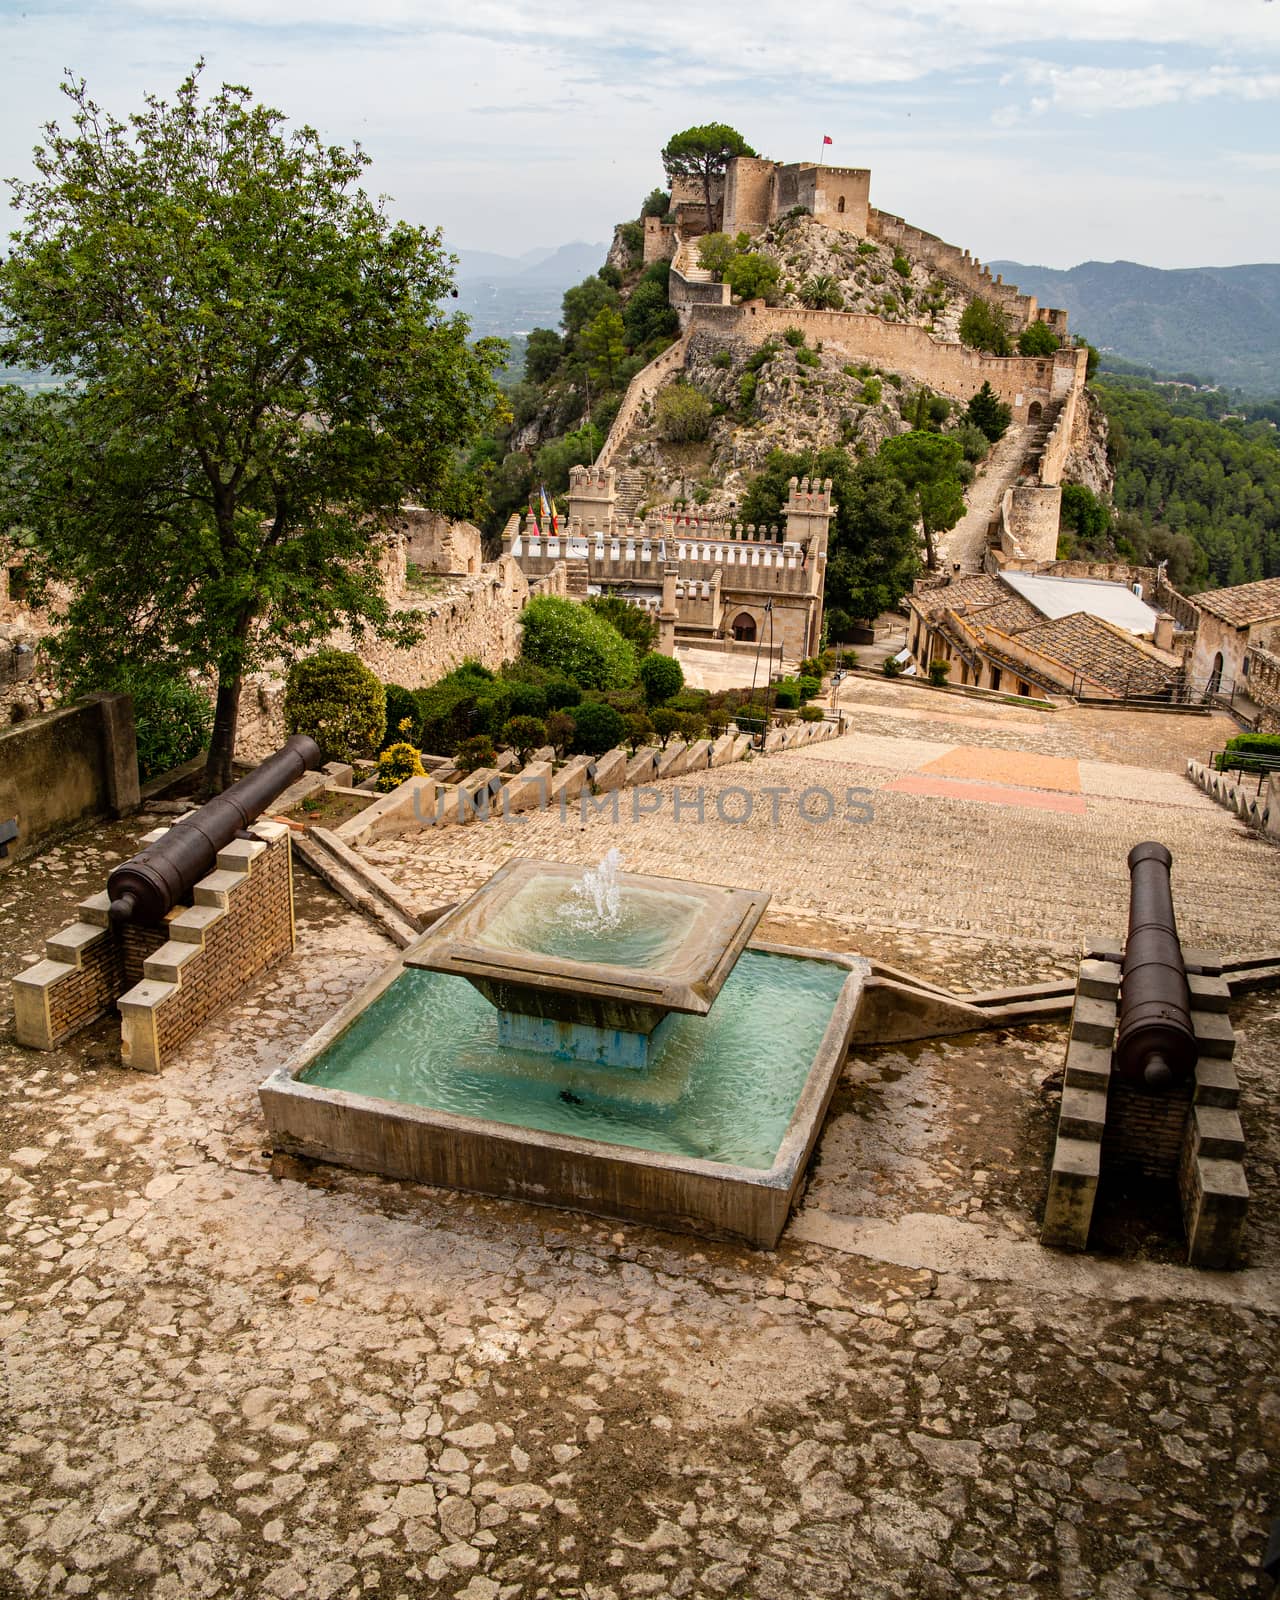 view of Xativa small castle in Valencia, Spain from walls of larger castle.